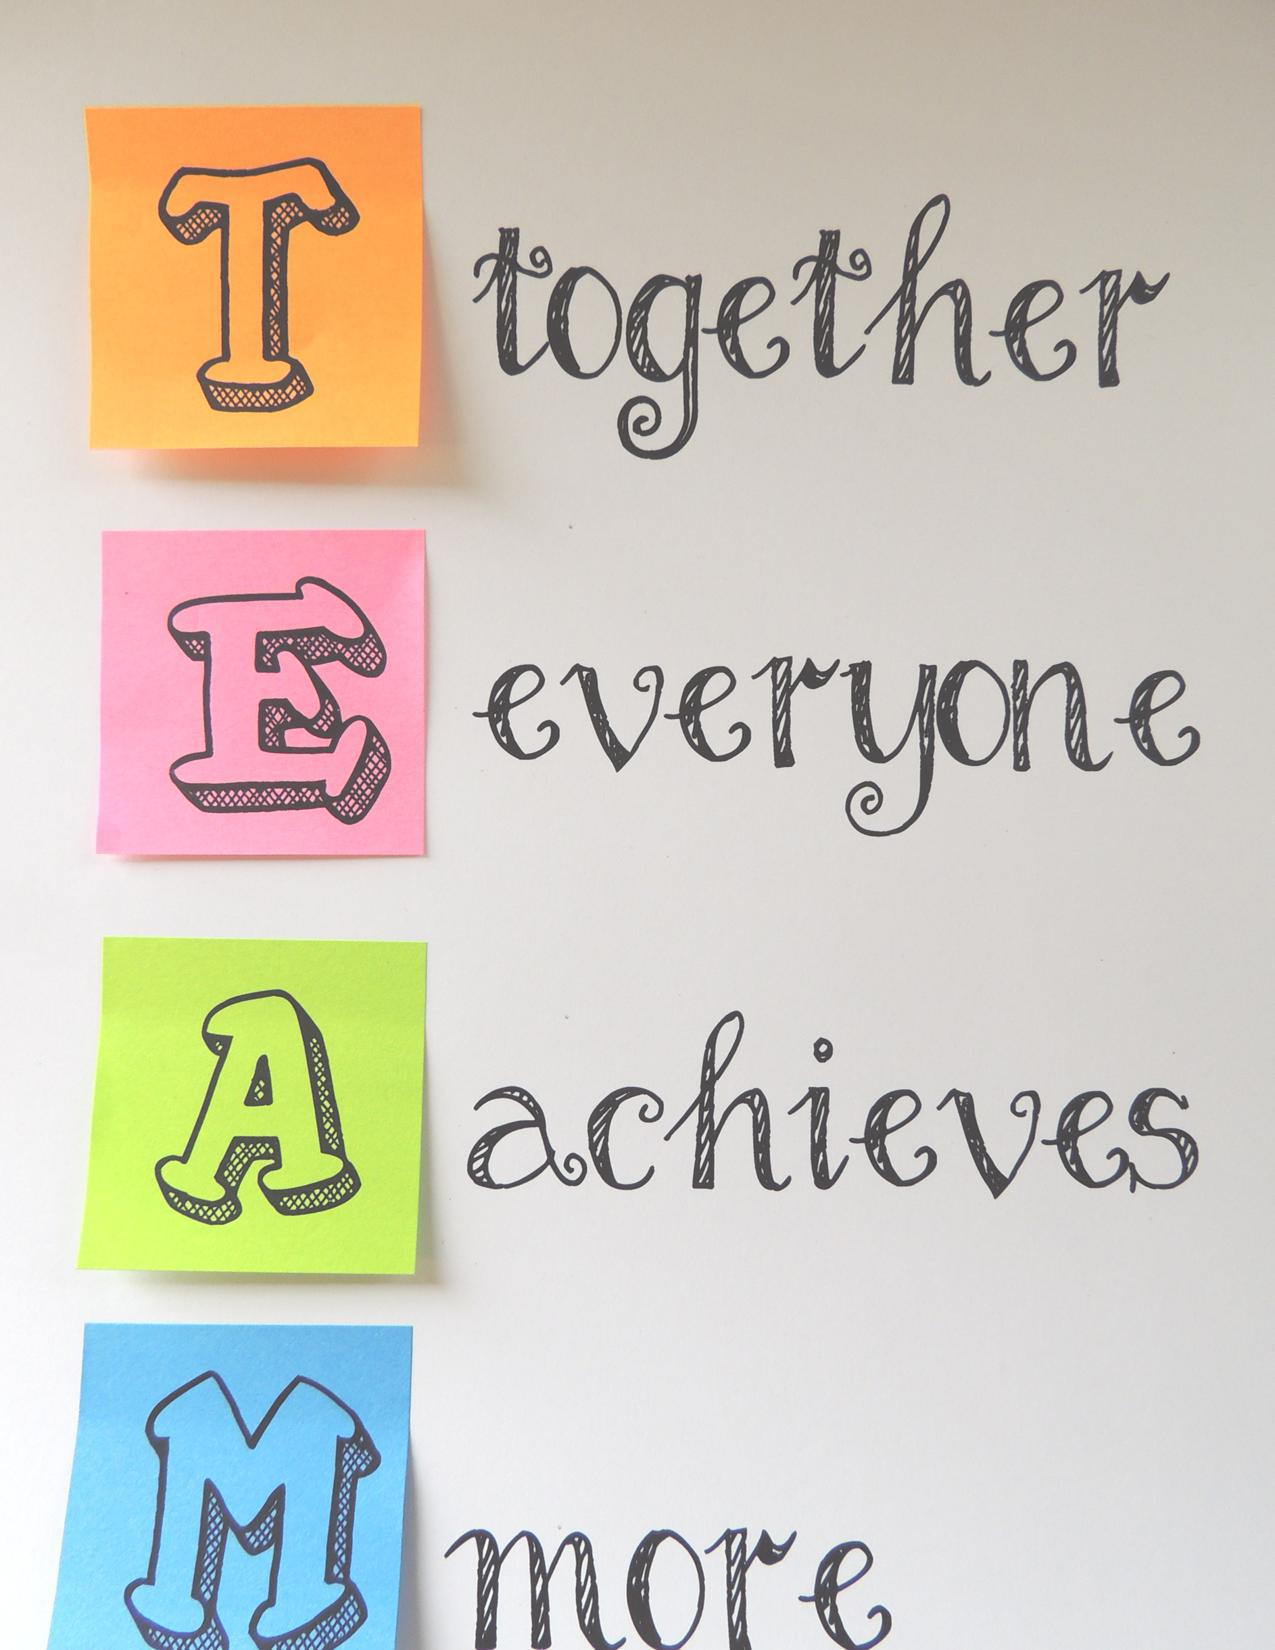 together-everyone-achieves-more-teamwork-quote.